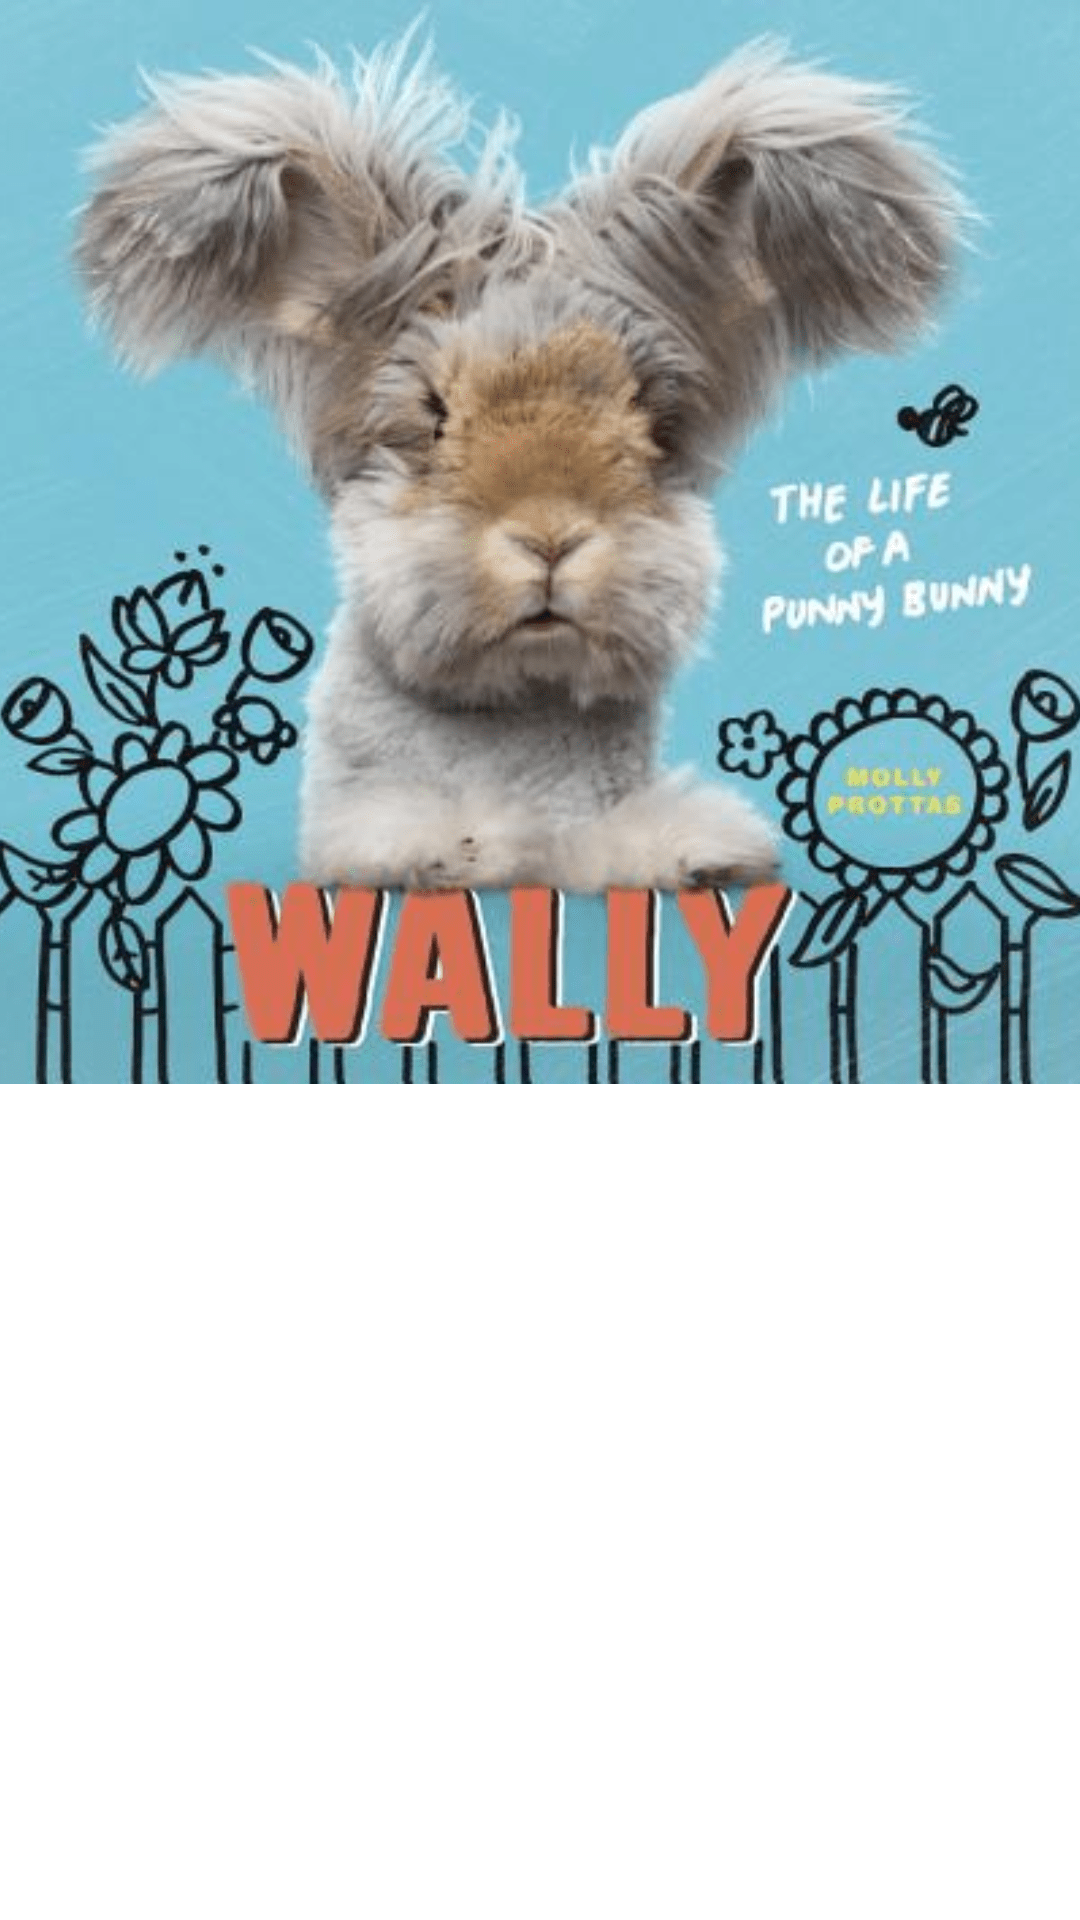 Wally : The Life of a Punny Bunny